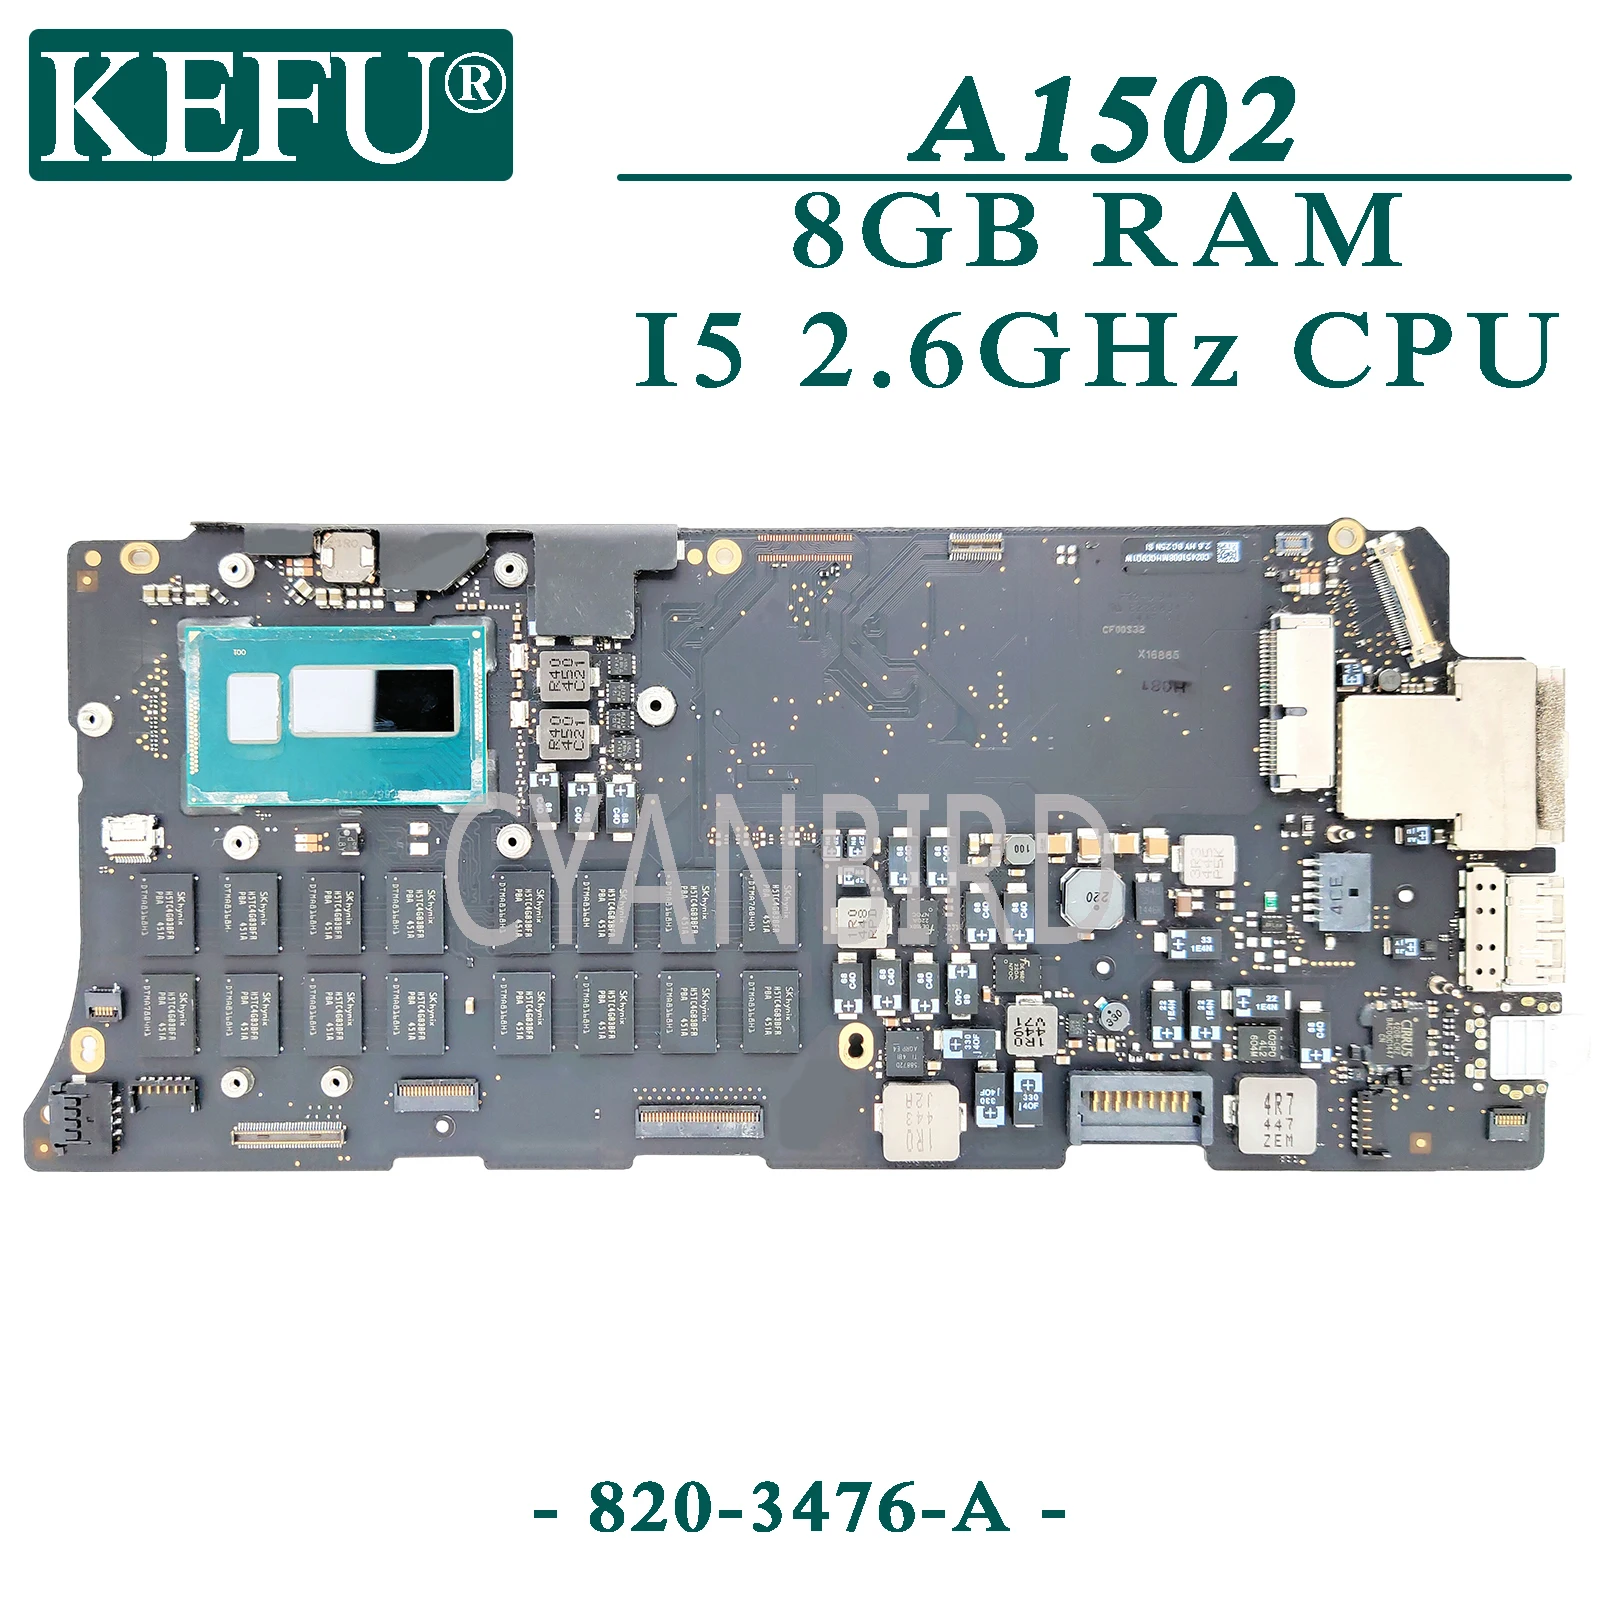 

KEFU 820-3476-A original mainboard for Apple A1502 with 8GB-RAM I5 2.4GHz CPU Laptop motherboard